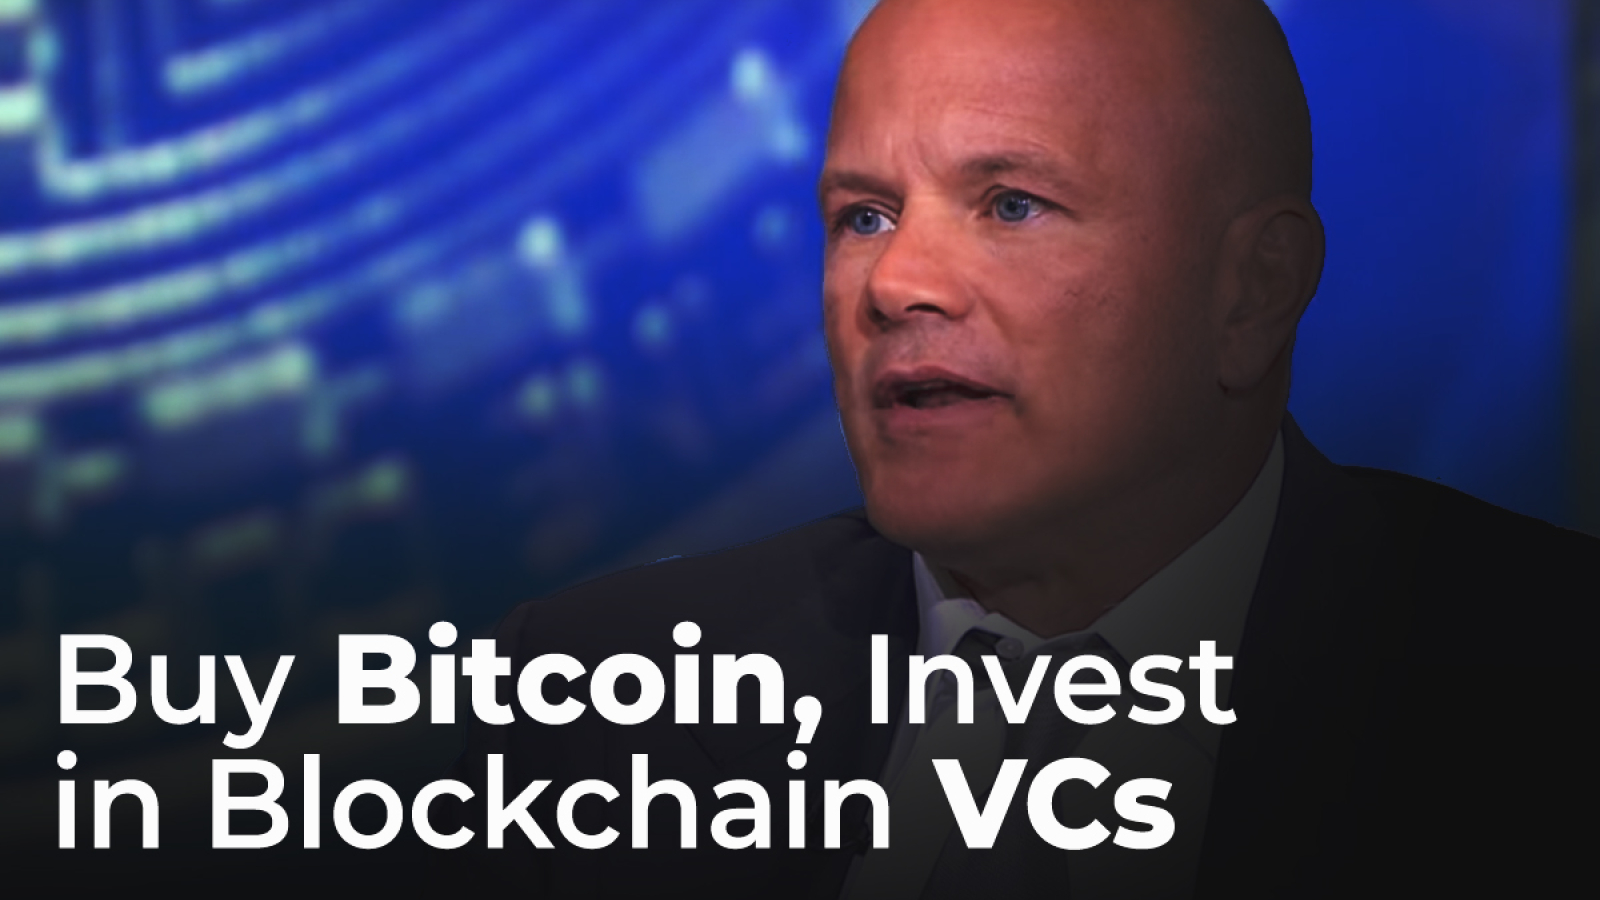 how much bitcoin did mike novogratz buy this weekend